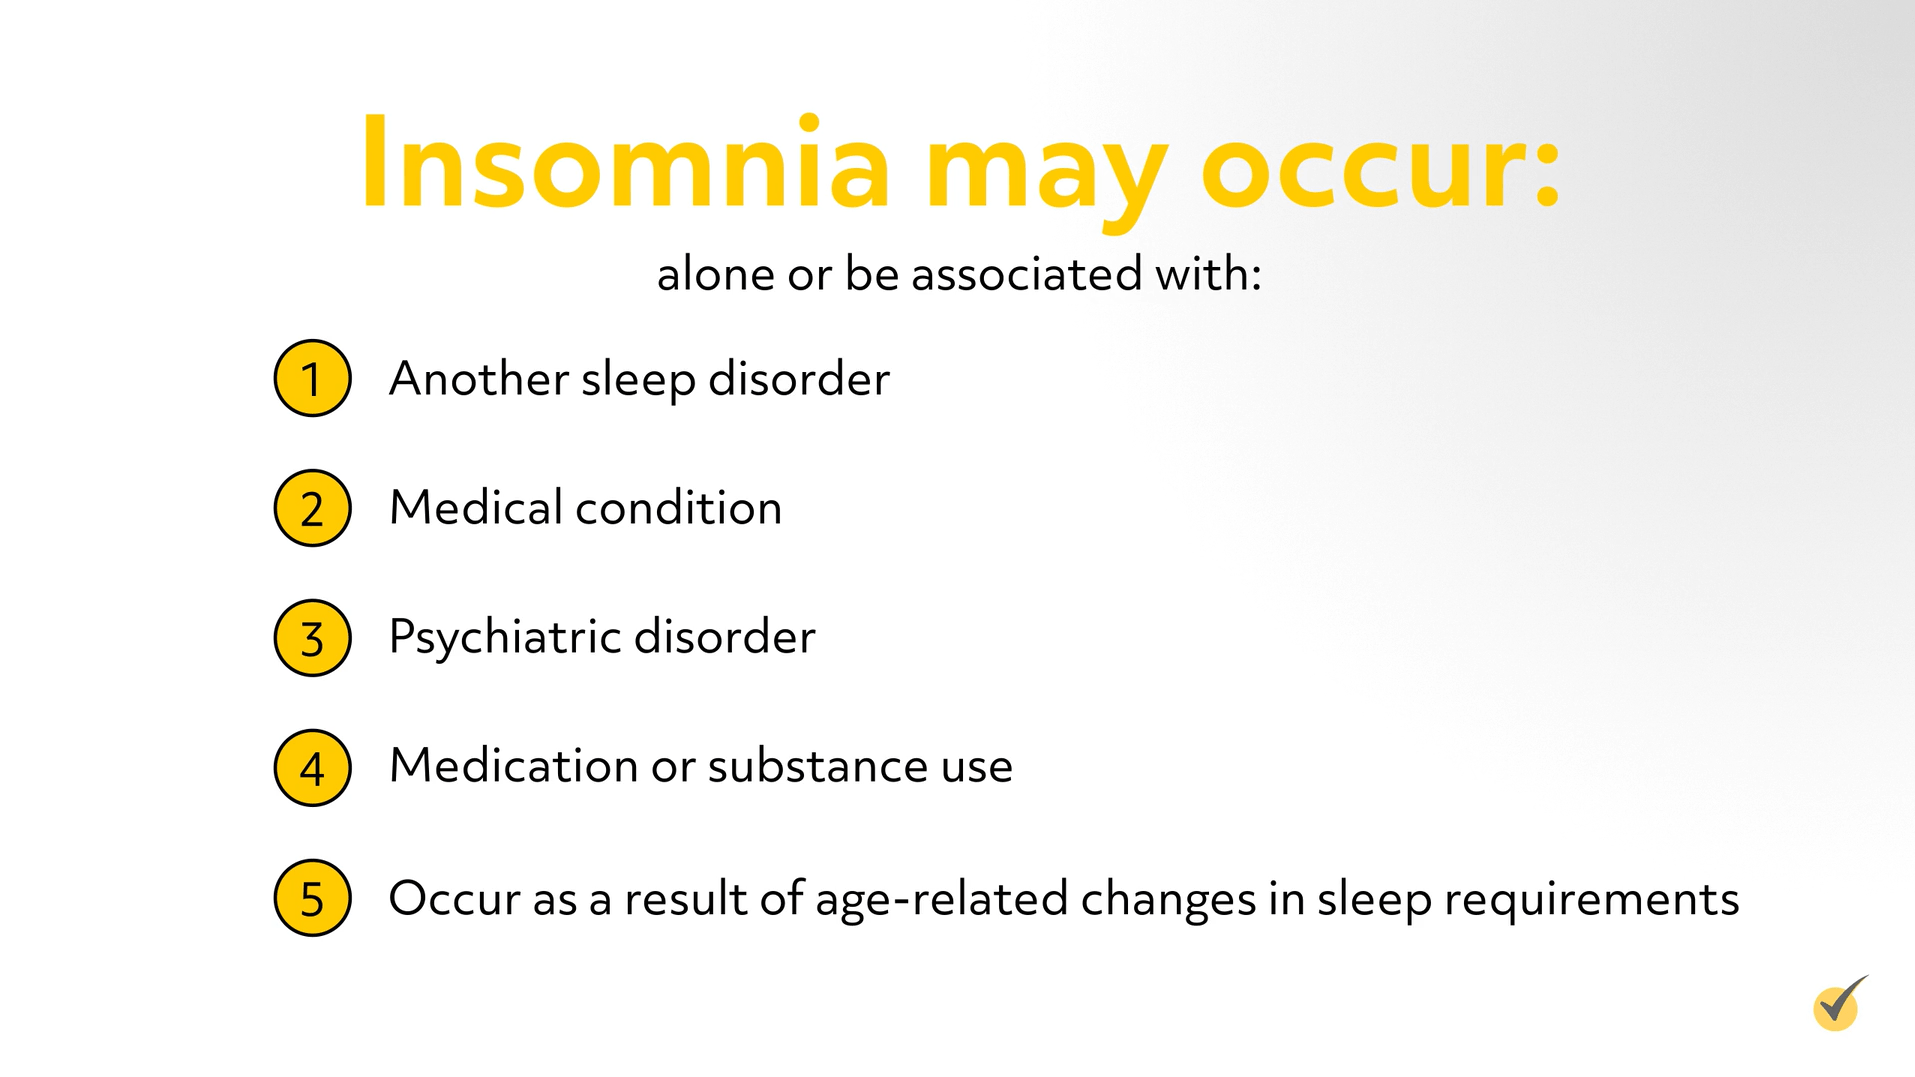 conditions that can occur with insomnia